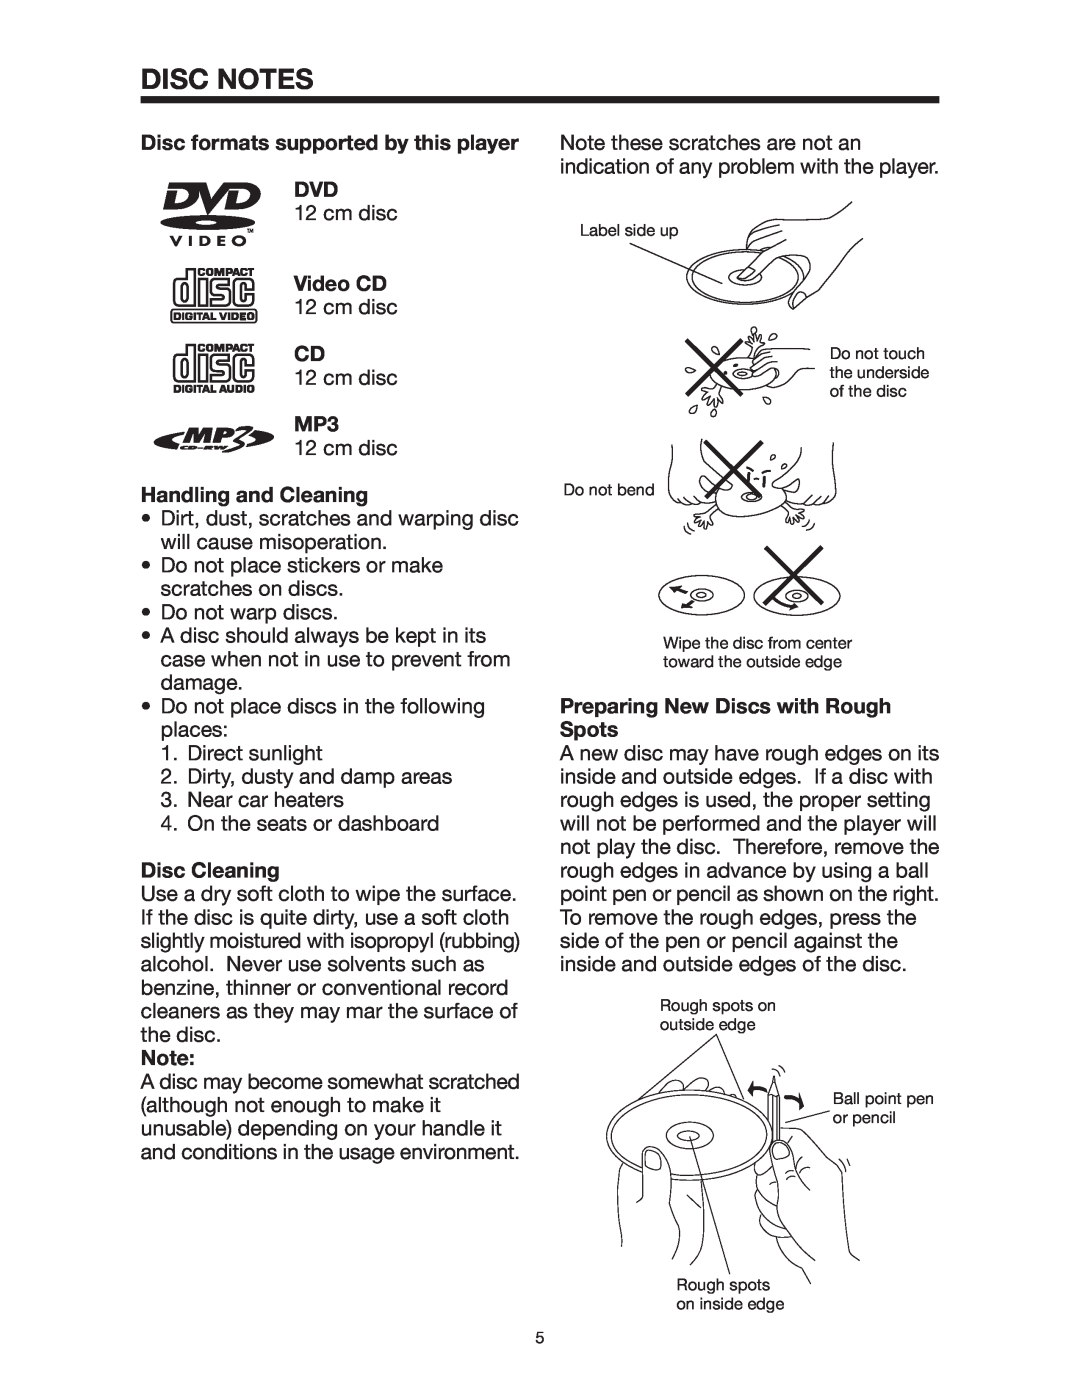 Radio Shack PLTD145 Disc Notes, Disc formats supported by this player DVD, Handling and Cleaning, Disc Cleaning 